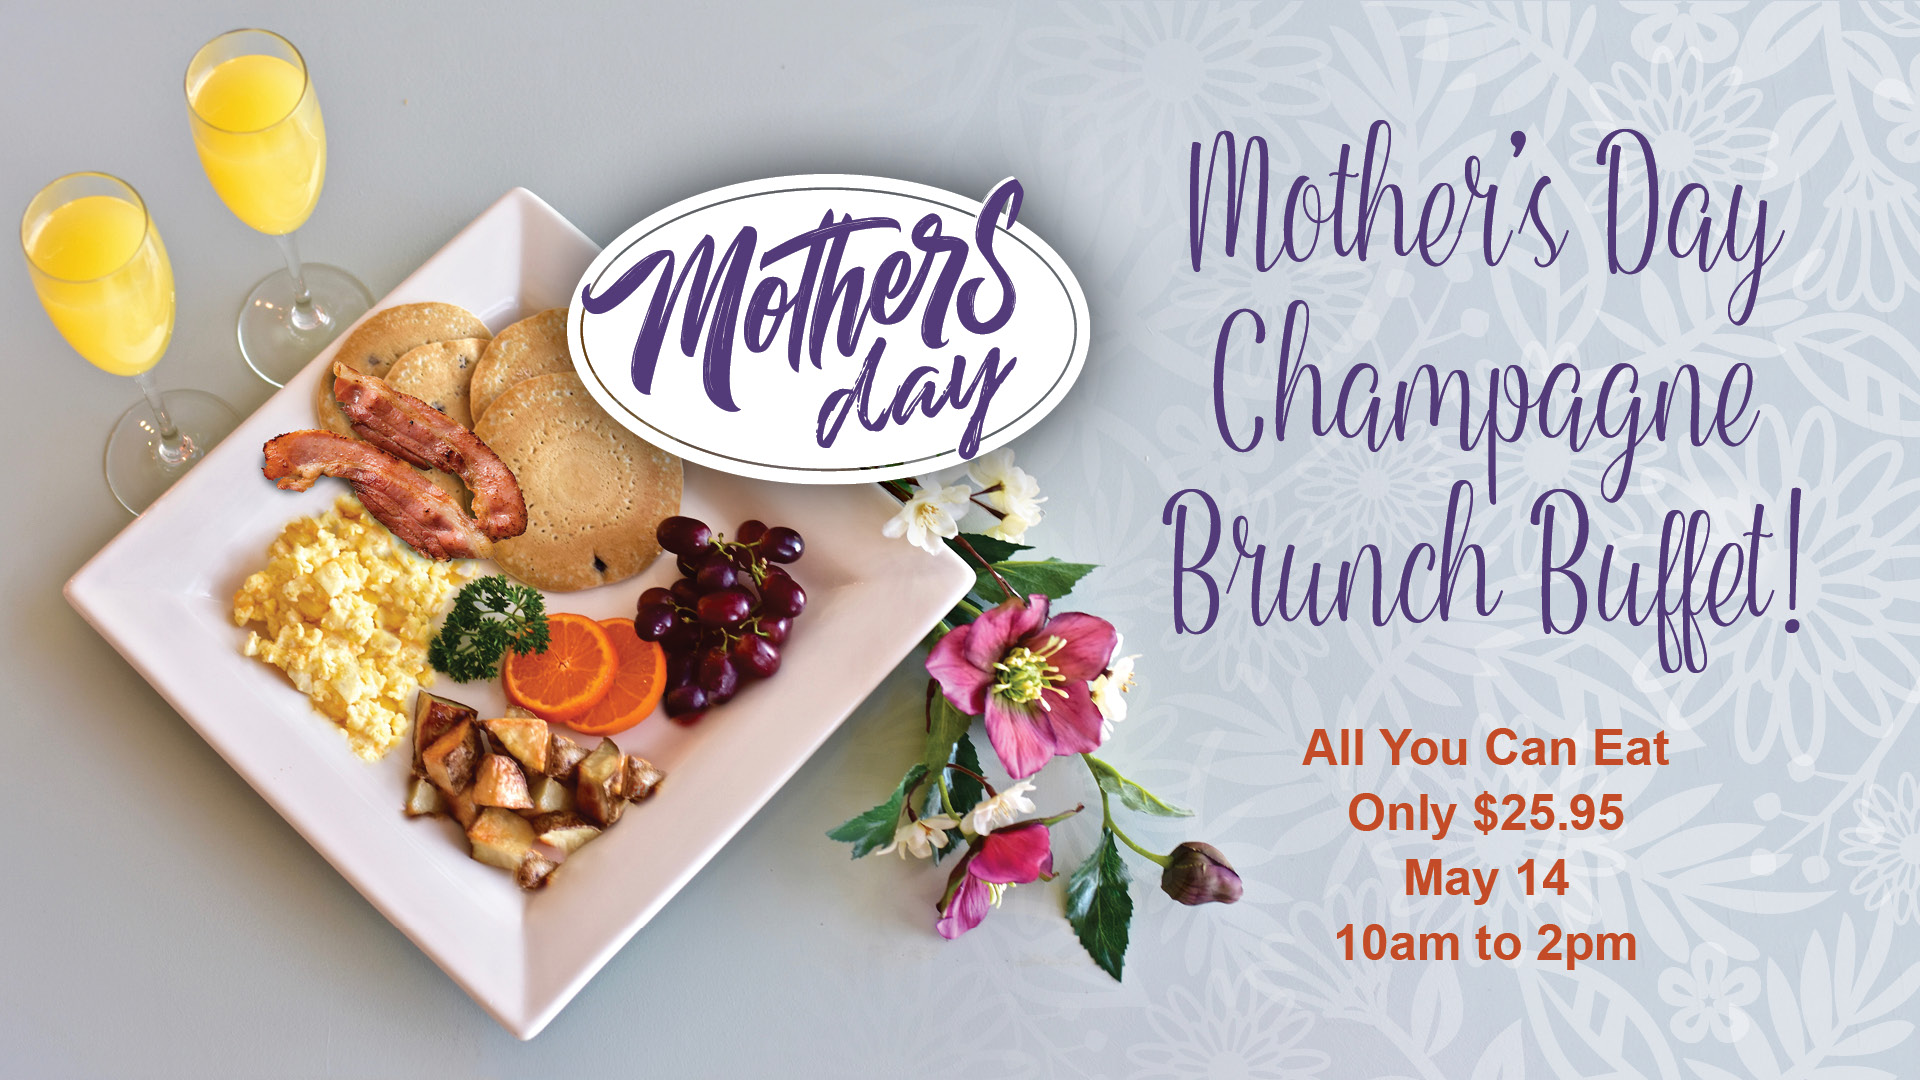 Mother's Day Champagne Brunch Buffet! All You Can Eat Only $25.95 May 14, 10am to 2pm